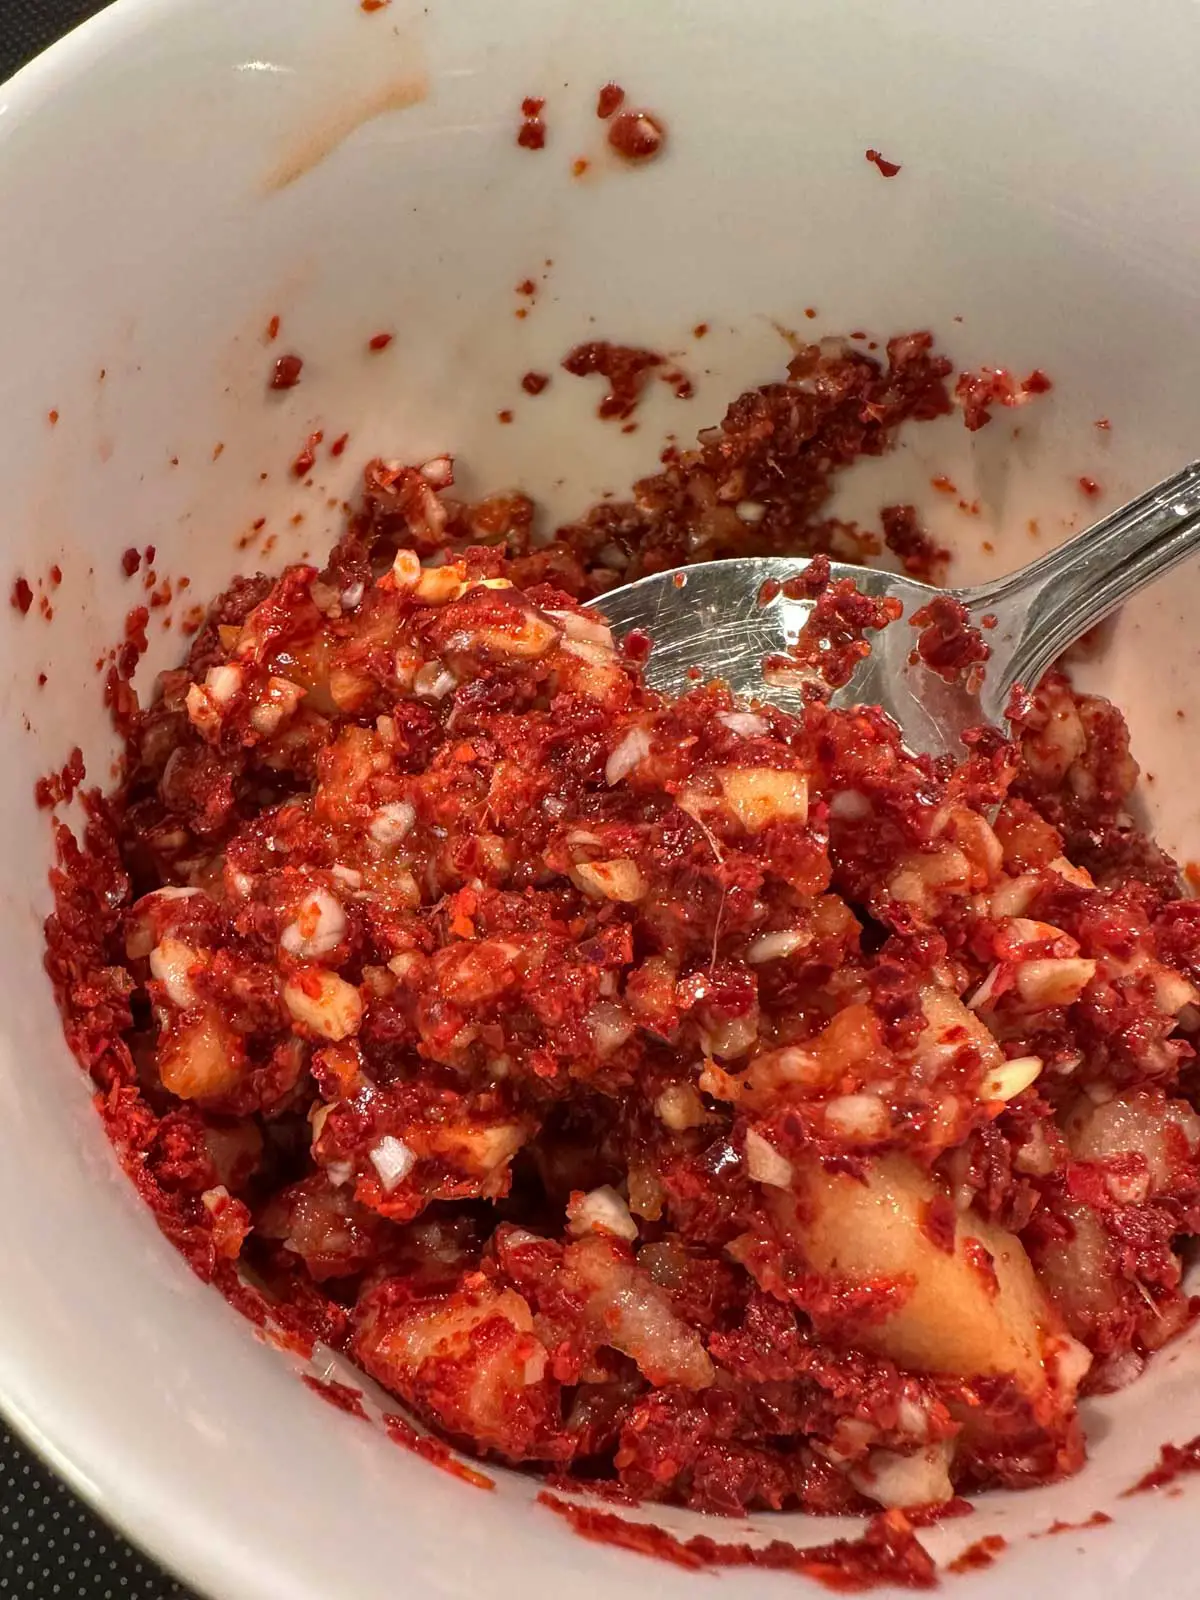 A white bowl containing a spicy red paste with red pepper powder, minced garlic, onion, and Asian pear. There is a spoon in the bowl containing some of the spicy paste.